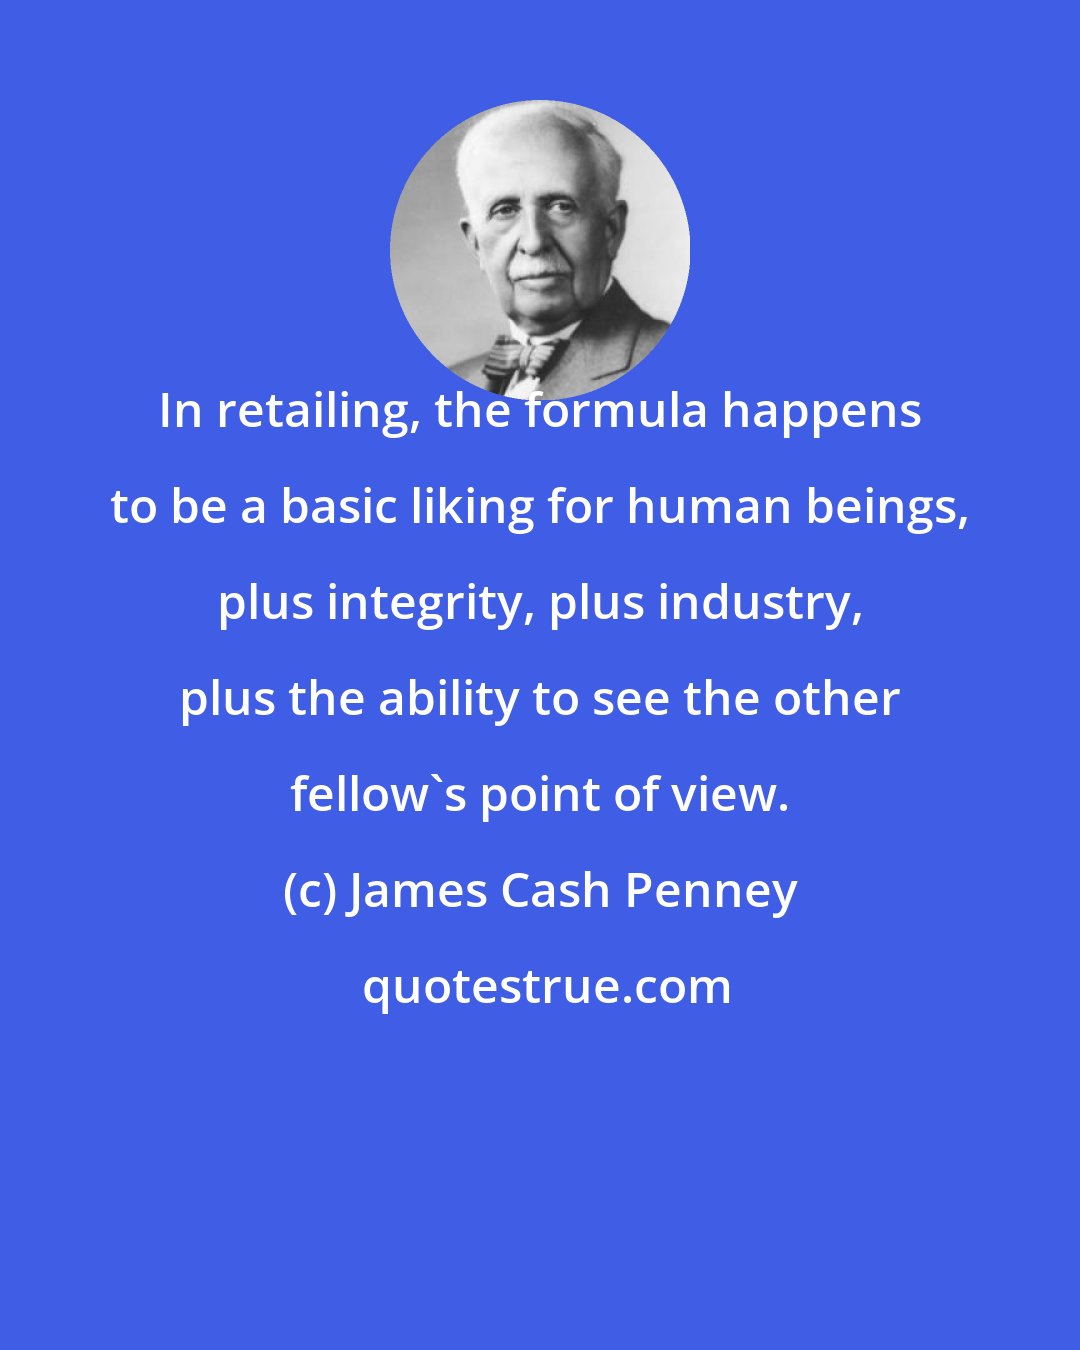 James Cash Penney: In retailing, the formula happens to be a basic liking for human beings, plus integrity, plus industry, plus the ability to see the other fellow's point of view.